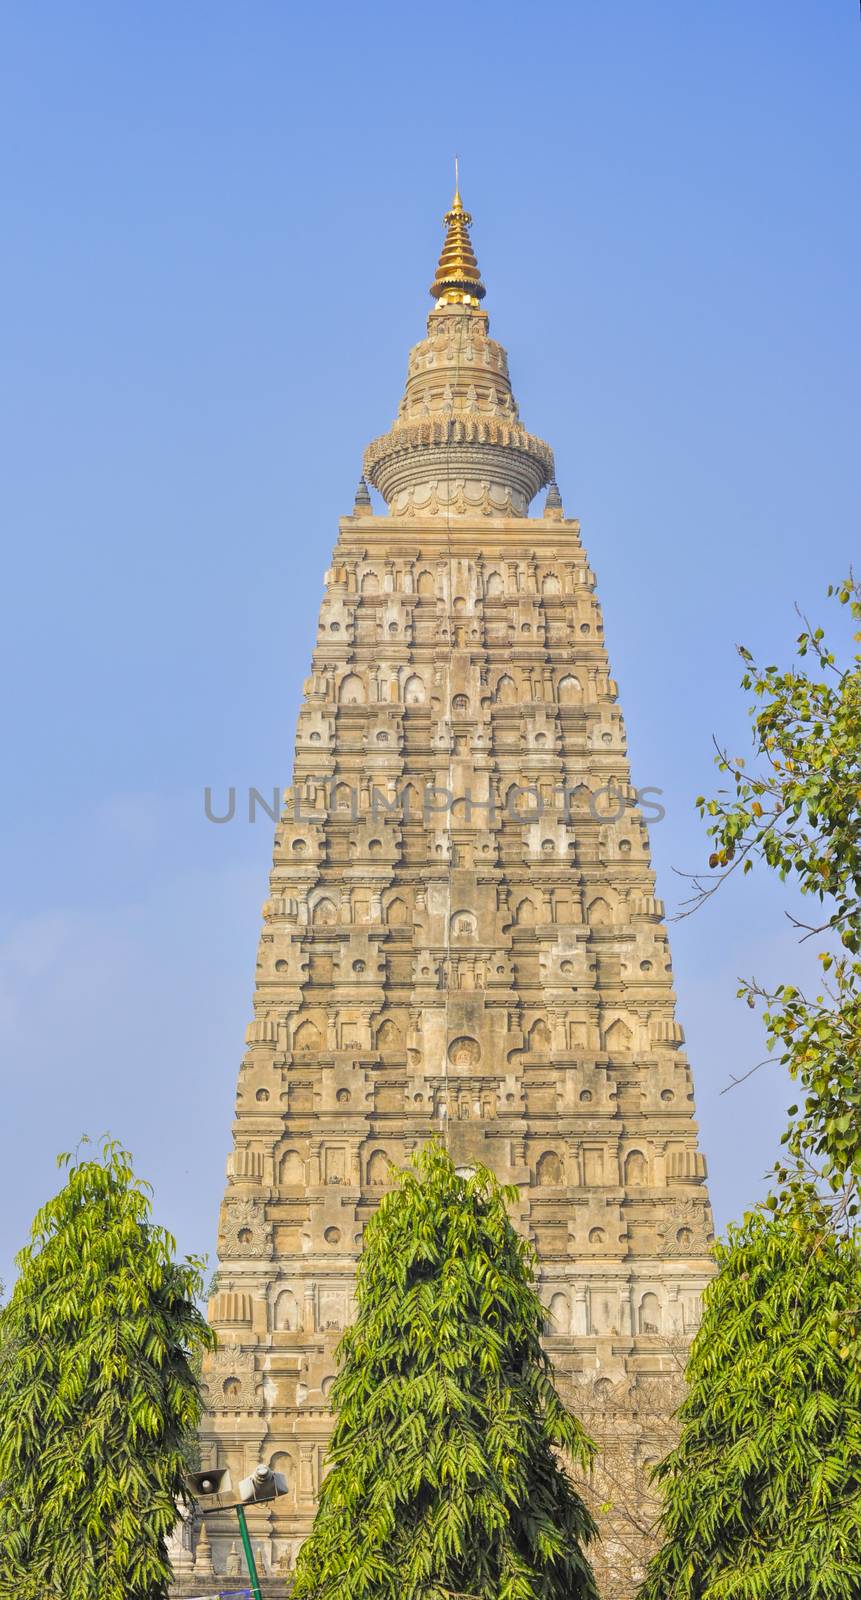 Beatifully decorated tower of buddhist Mahabodhi Temple complex in Bihar, India